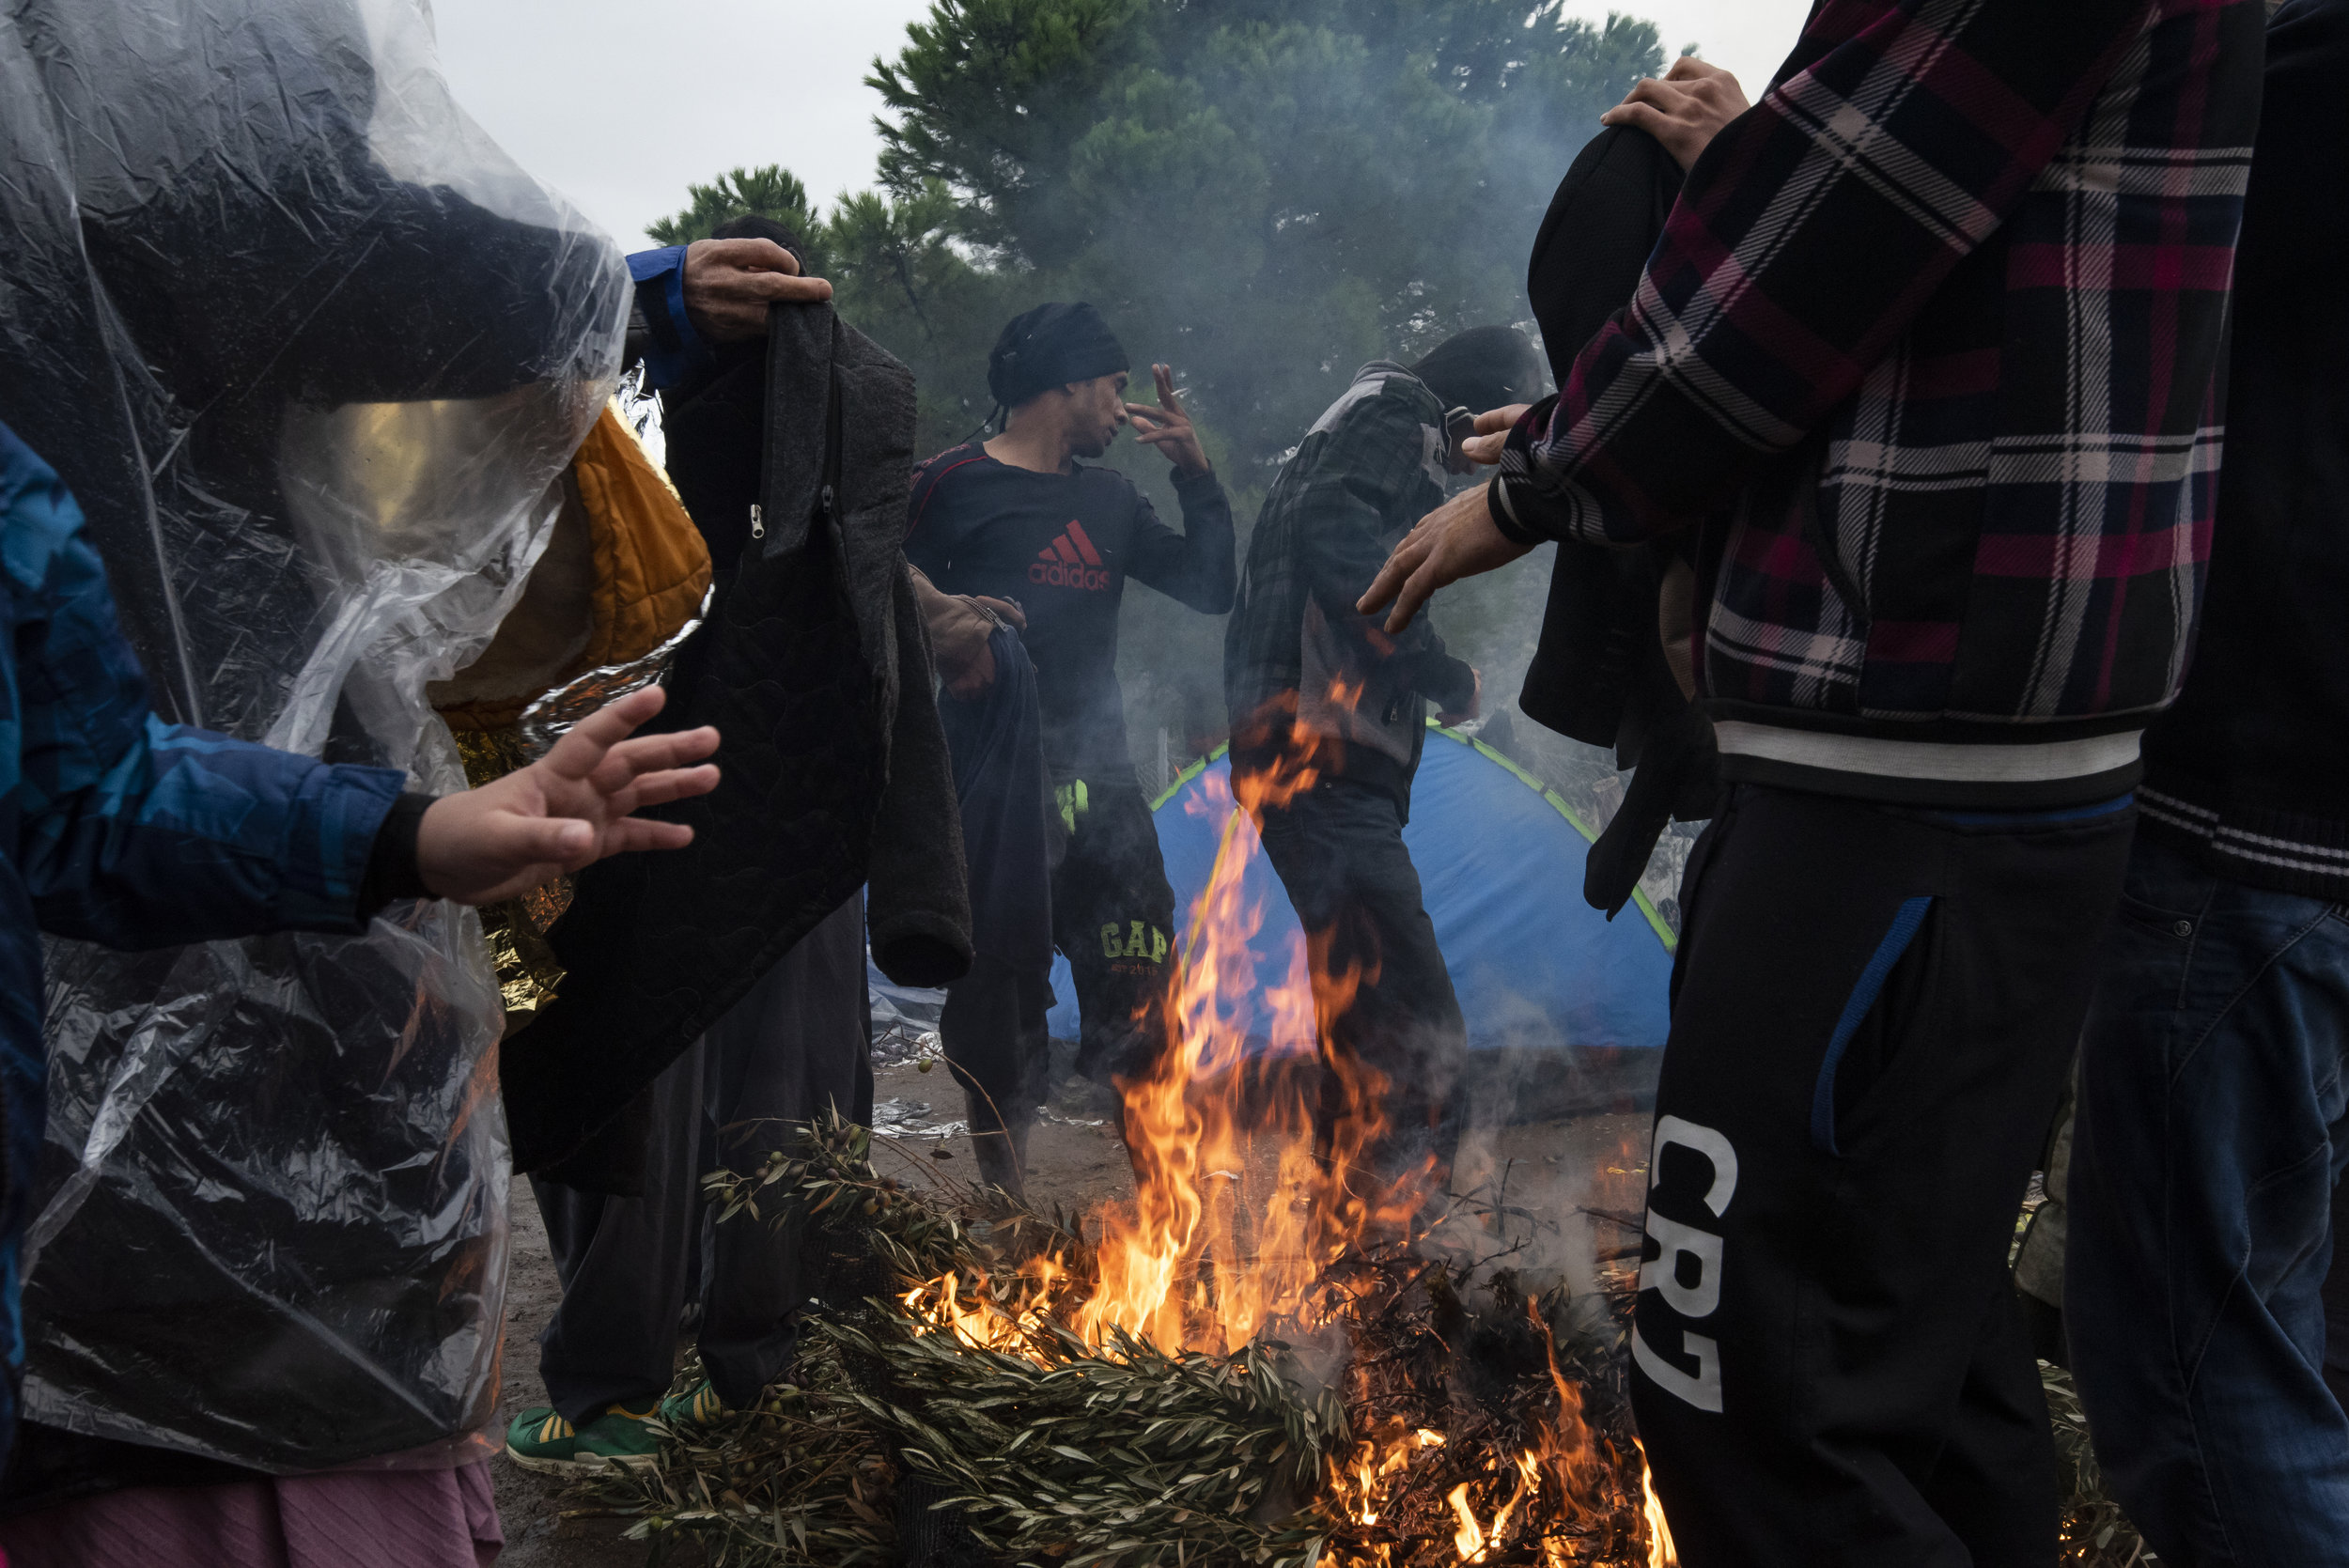  Late October in Lesvos can fluctuate between stifling heat and unremitting rain. Refugees will burn anything they get get their hands on to build a fire, warm up and dry out. 